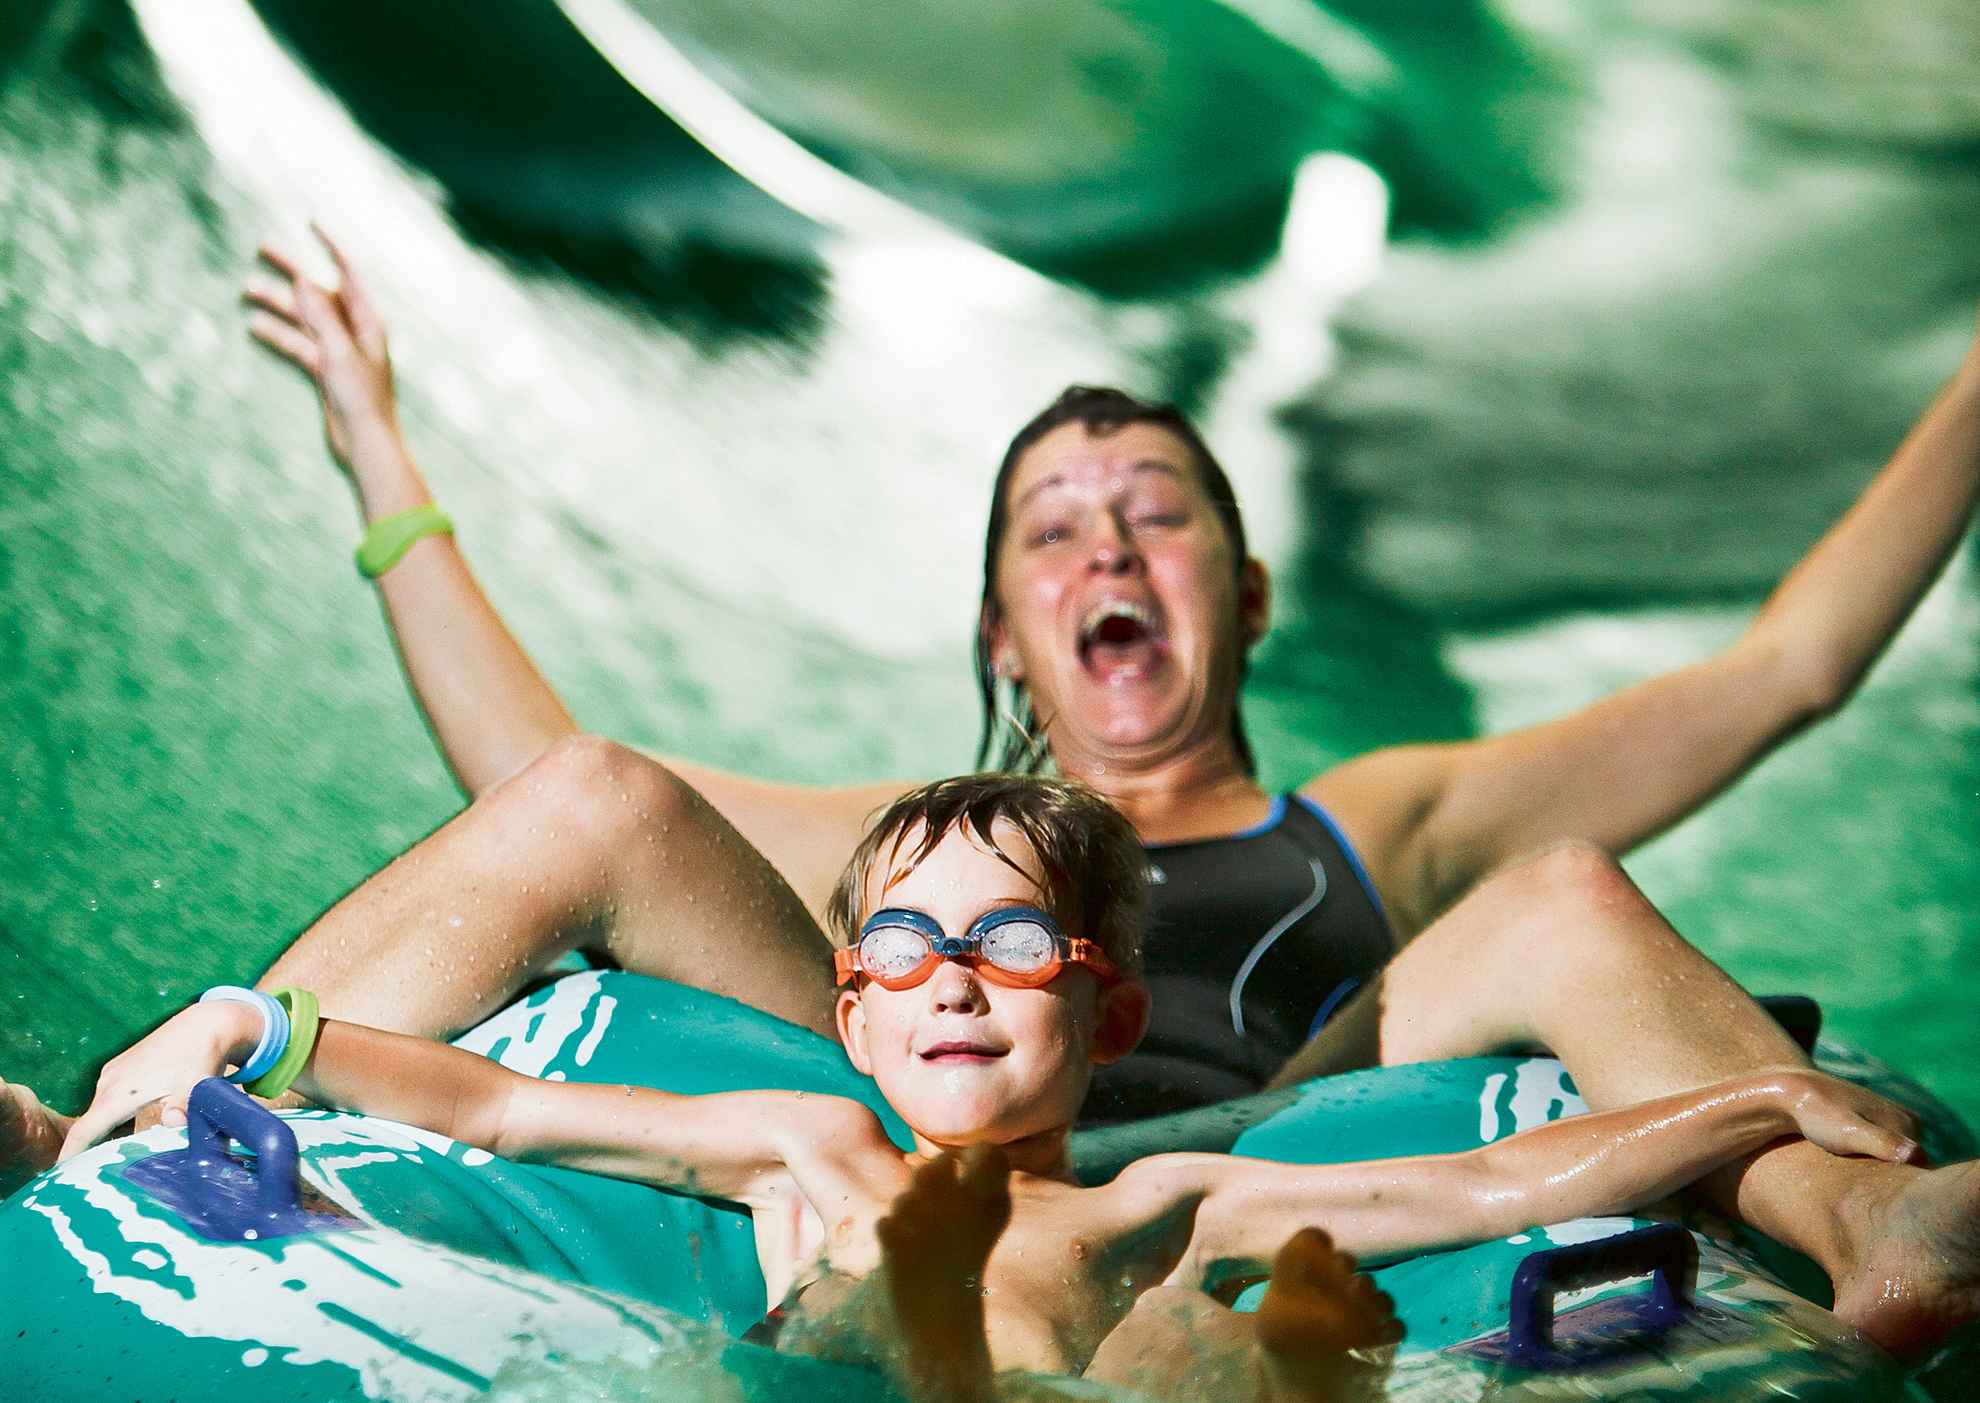 Smiling boy with swimming googles riding a tube with a laughing woman in a waterslide